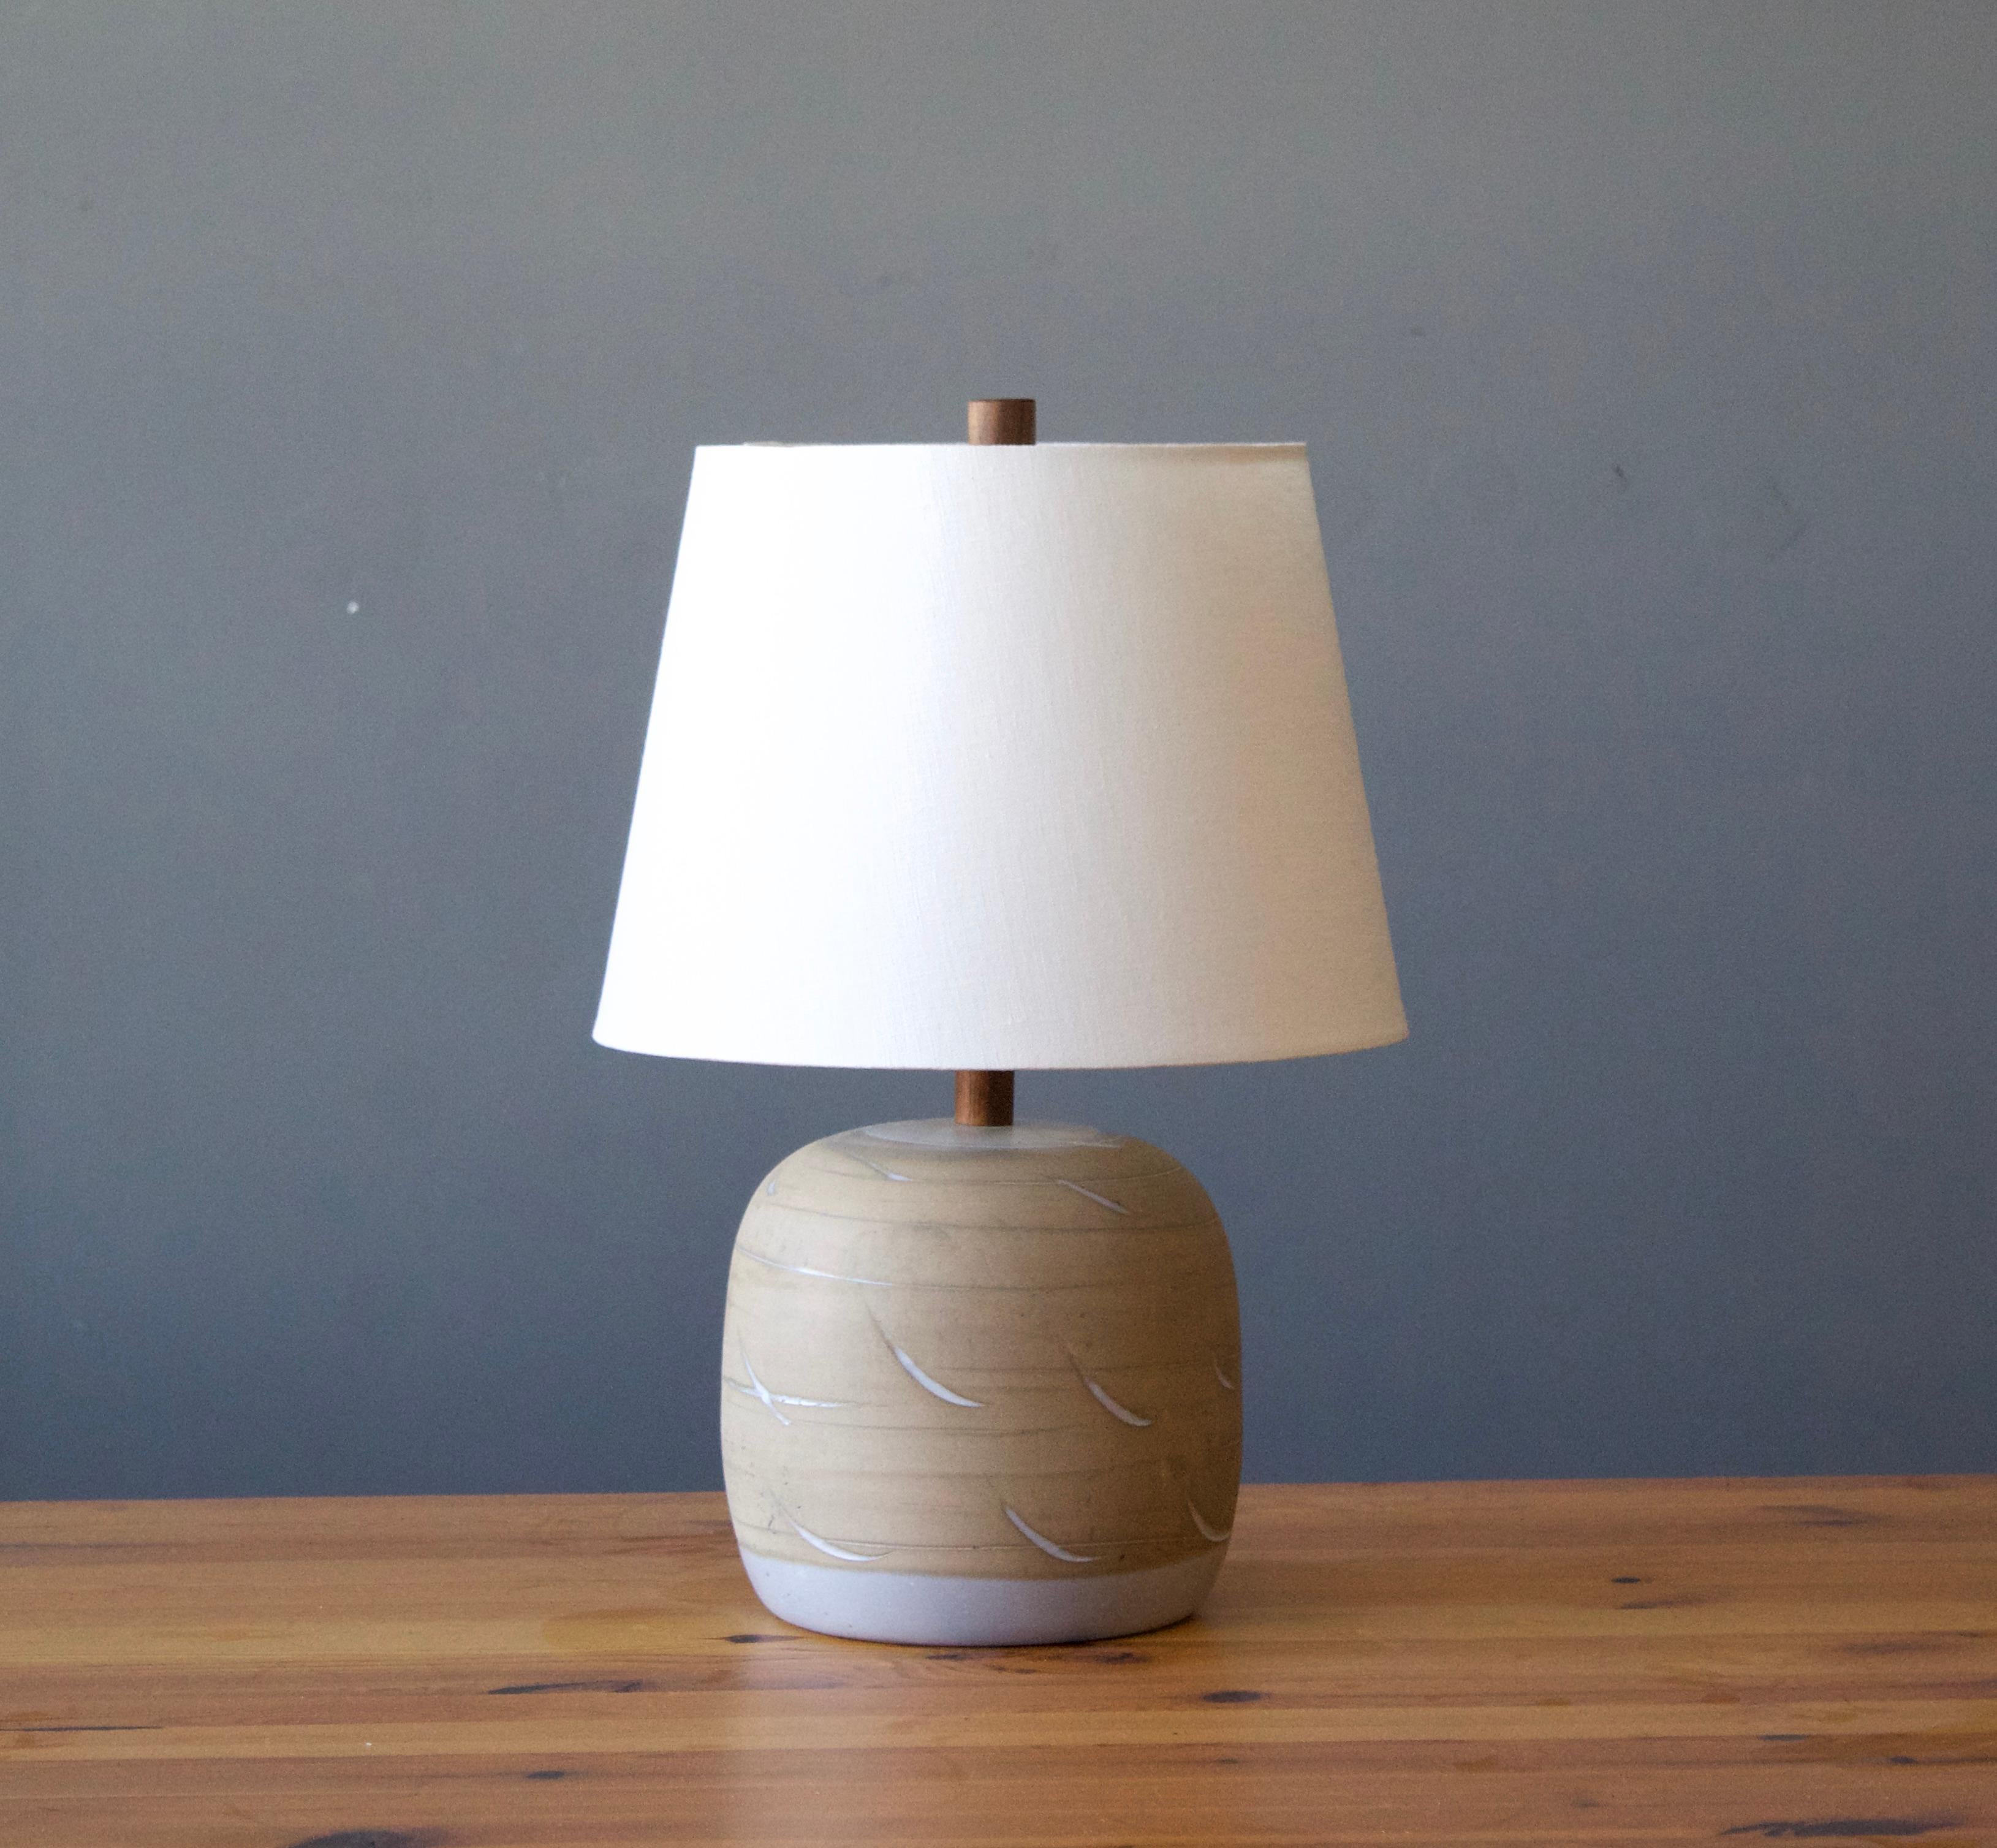 A table lamp designed by husband and wife duo Jane & Gordon Martz. Produced by Marshall Studios, Indianapolis. 

The base is slip-cast and then dipped into glaze and hand painted. Design also incorporates exquisite walnut neck and finial. Base is